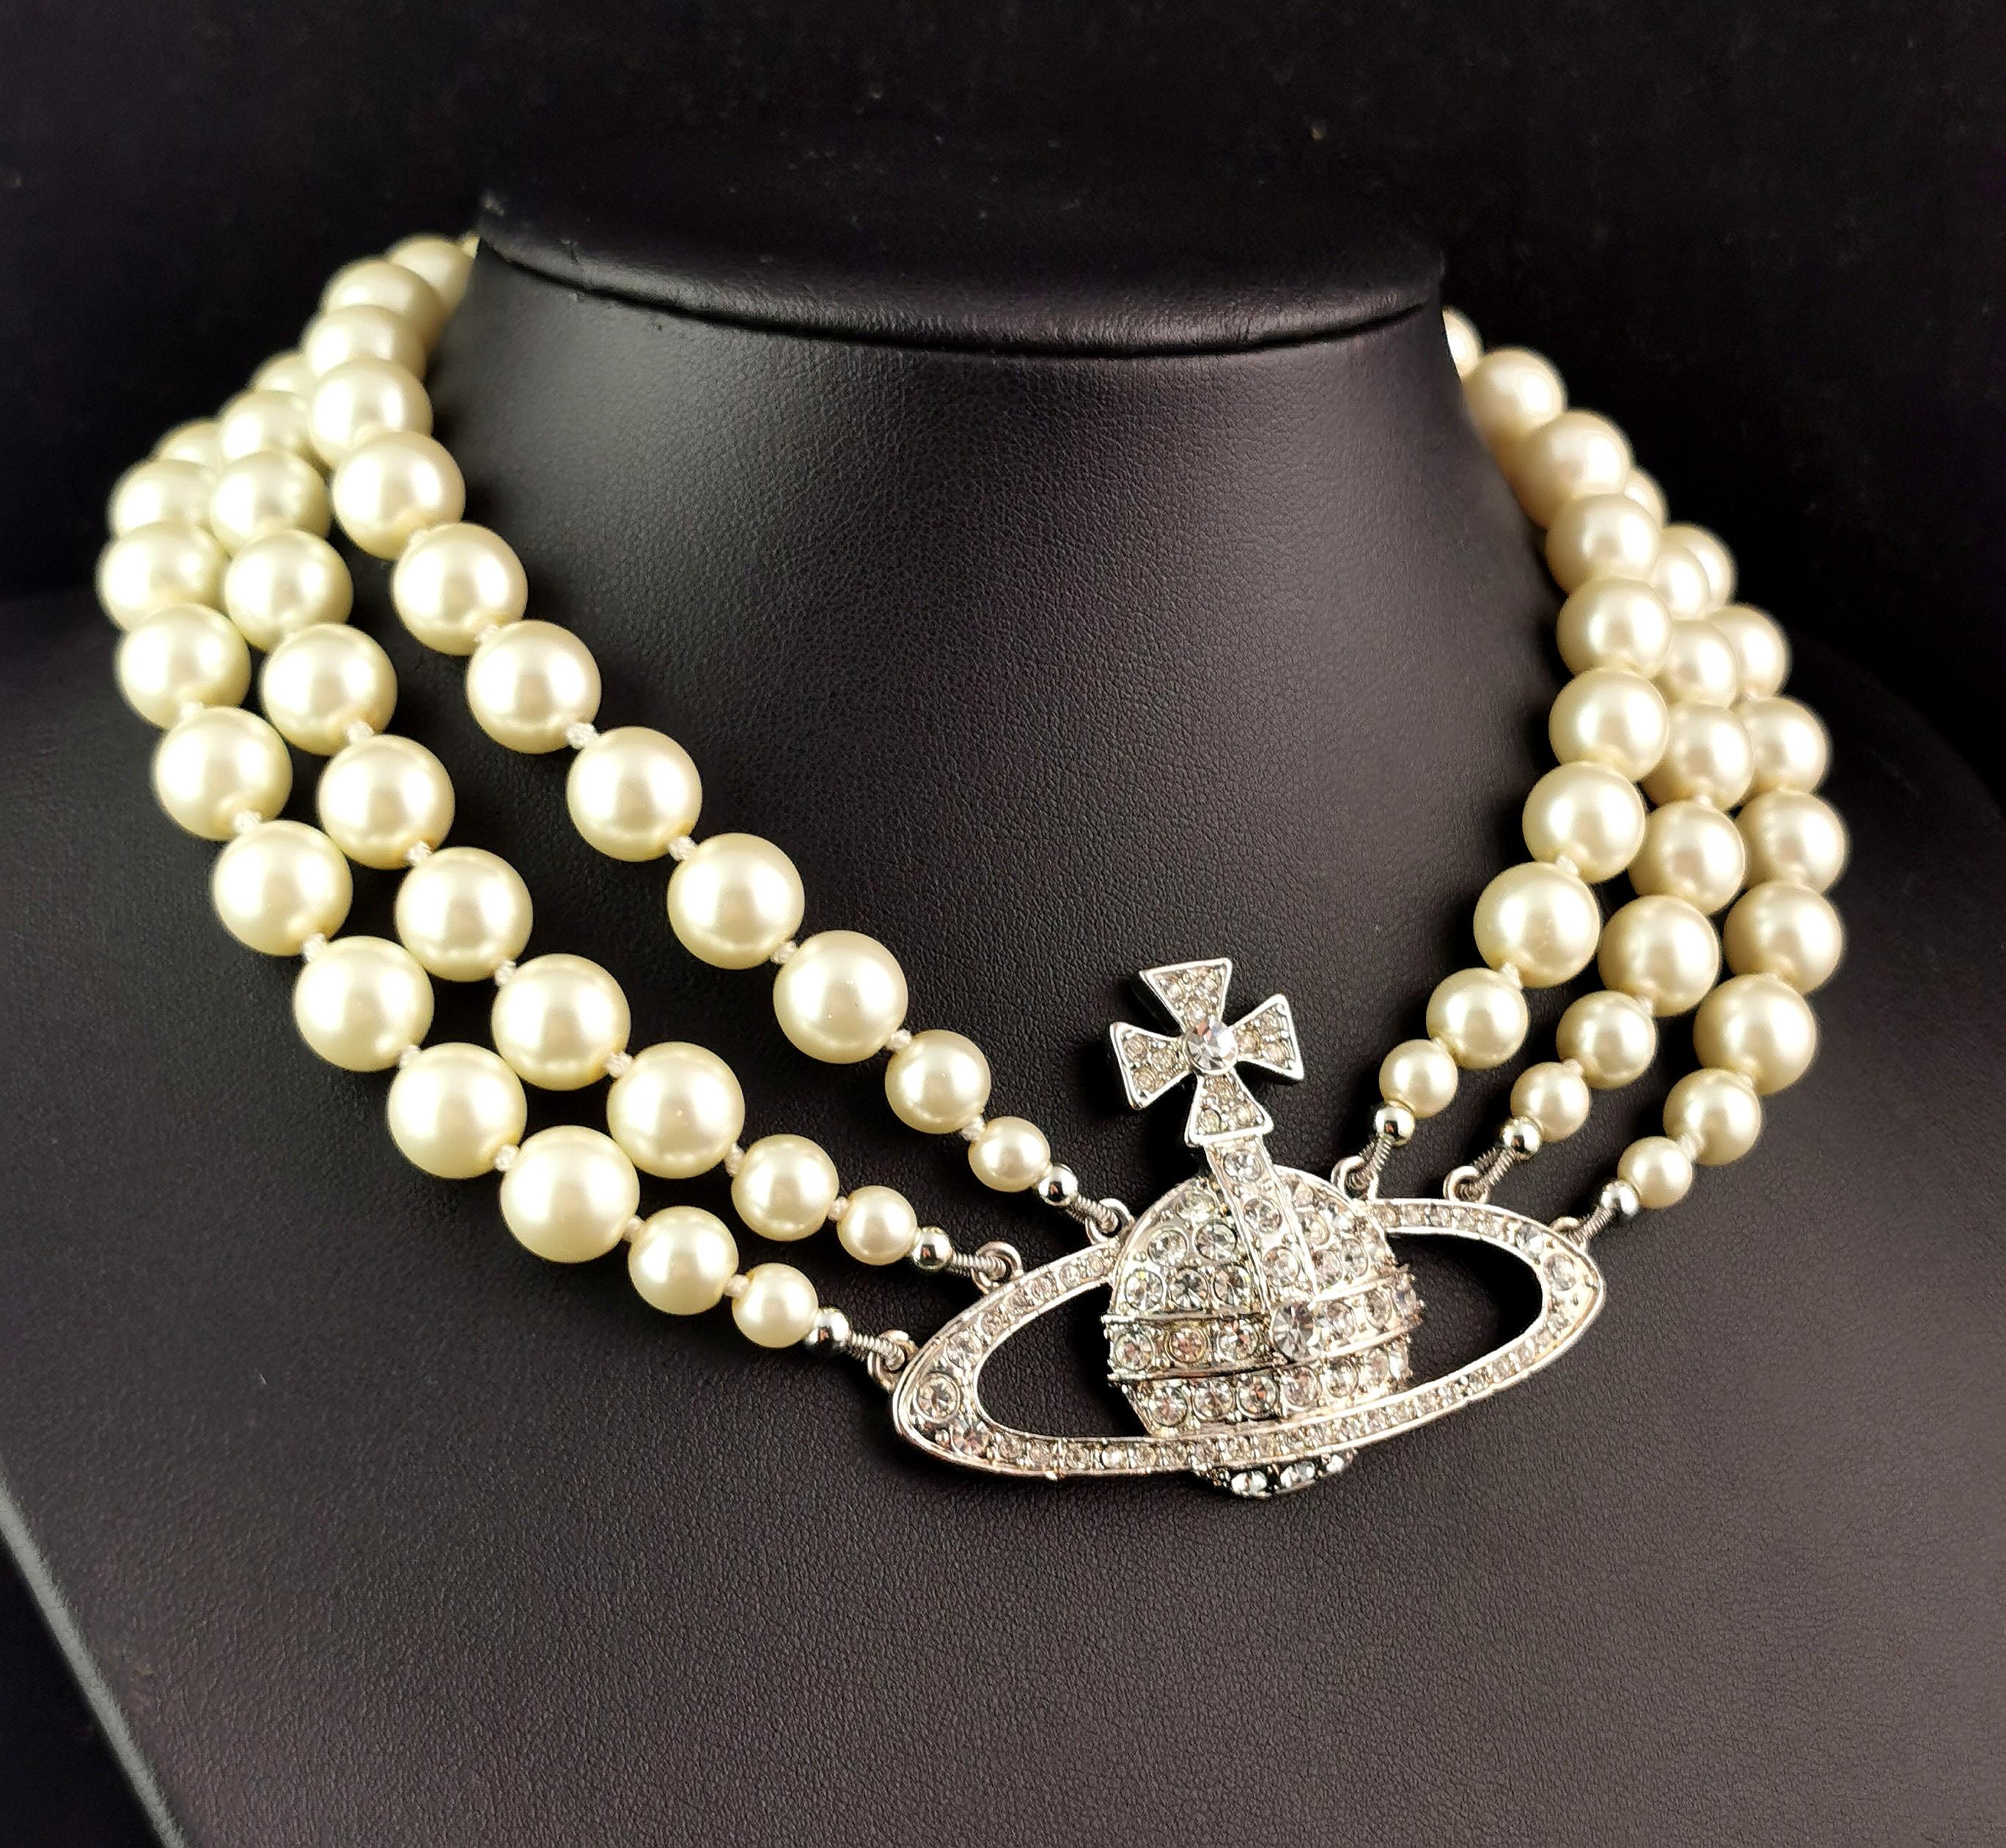 An absolutely iconic vintage Vivienne Westwood choker necklace.

This design was first showcased in Vivienne's portrait collection in the 90s, it is the three strand bas relief choker.

Made up of three rows of chunky faux pearls it features a large